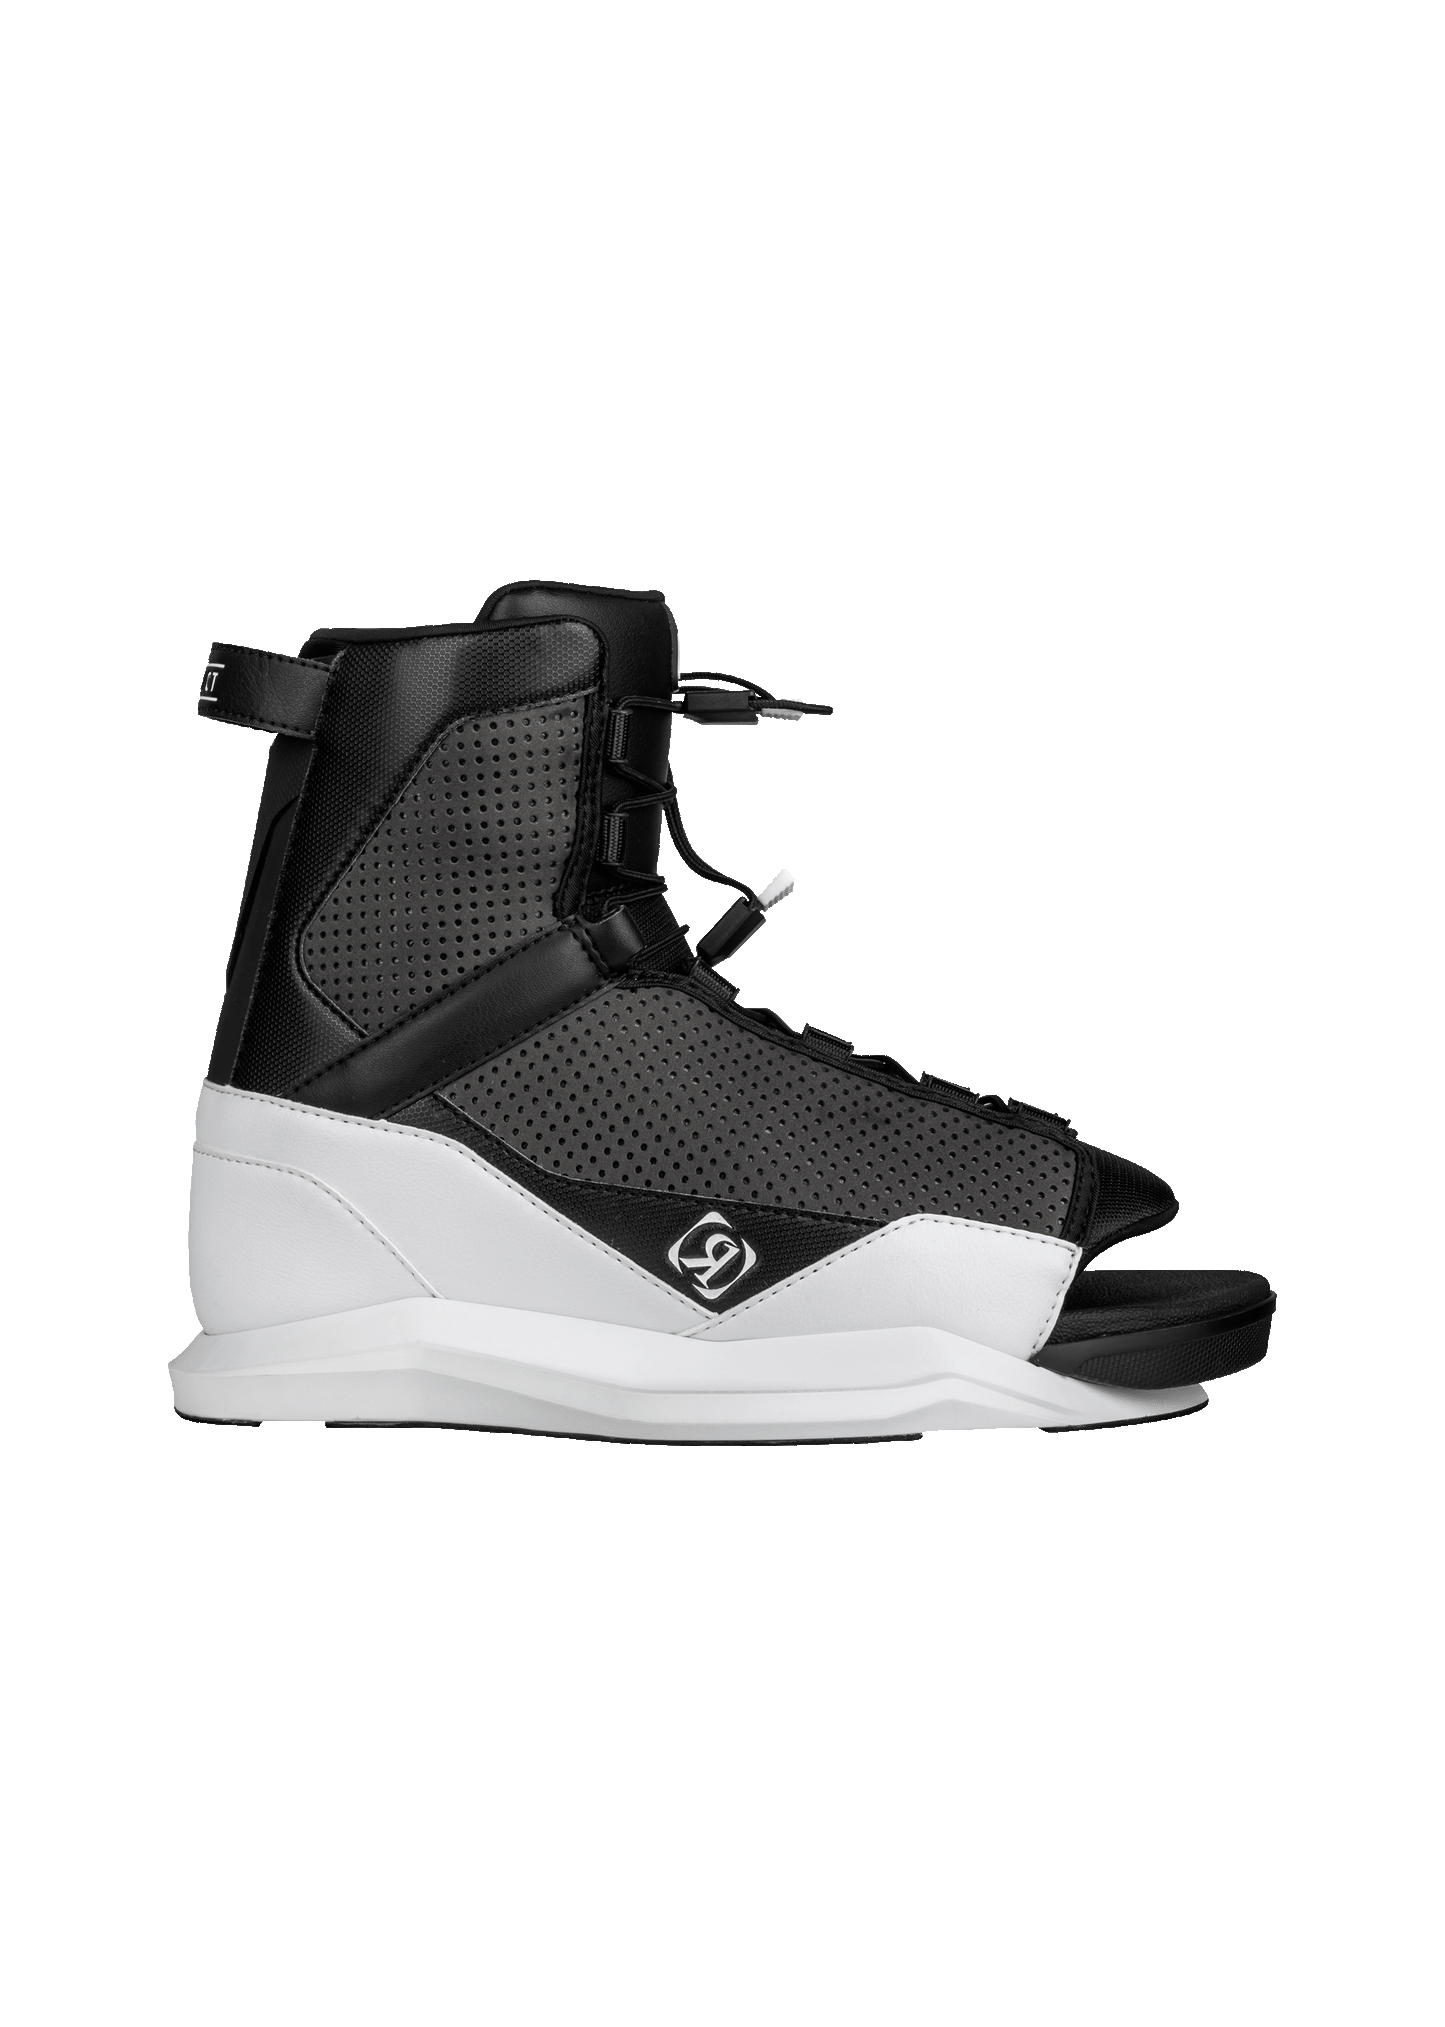 DISTRICT WAKEBOARD BOOT